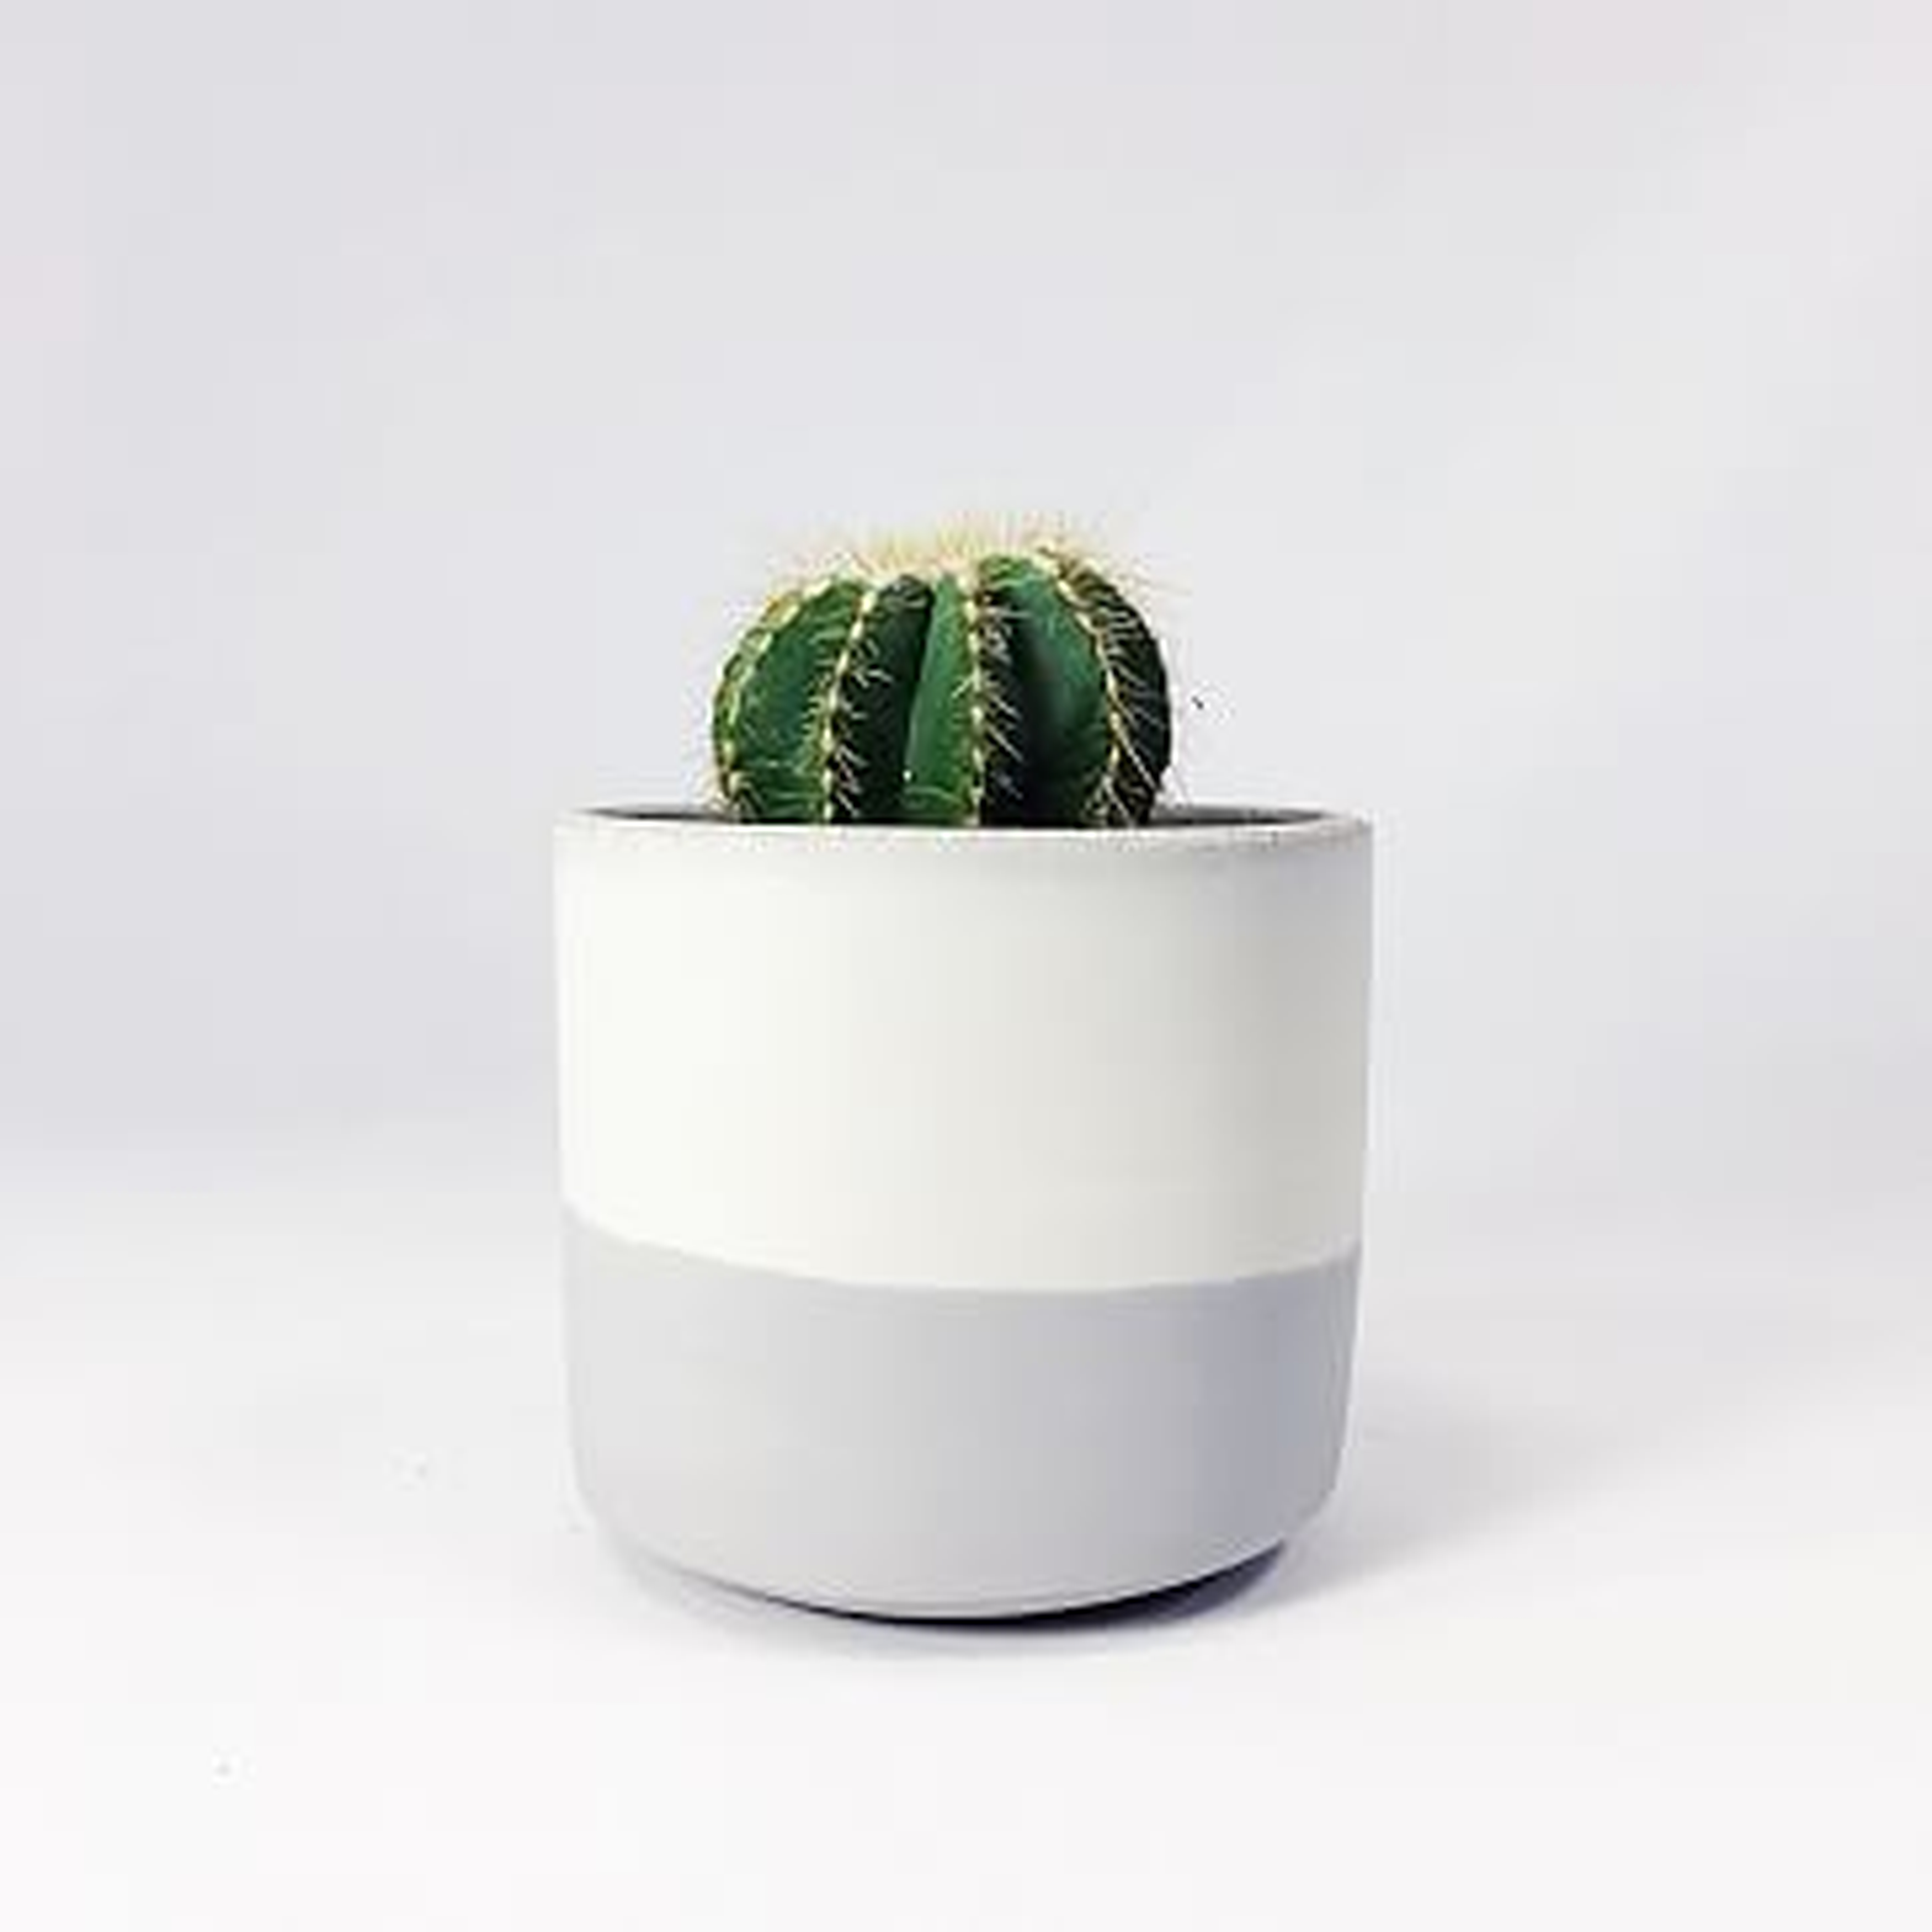 Straight-Sided Concrete Pot, Small, Light Gray - West Elm